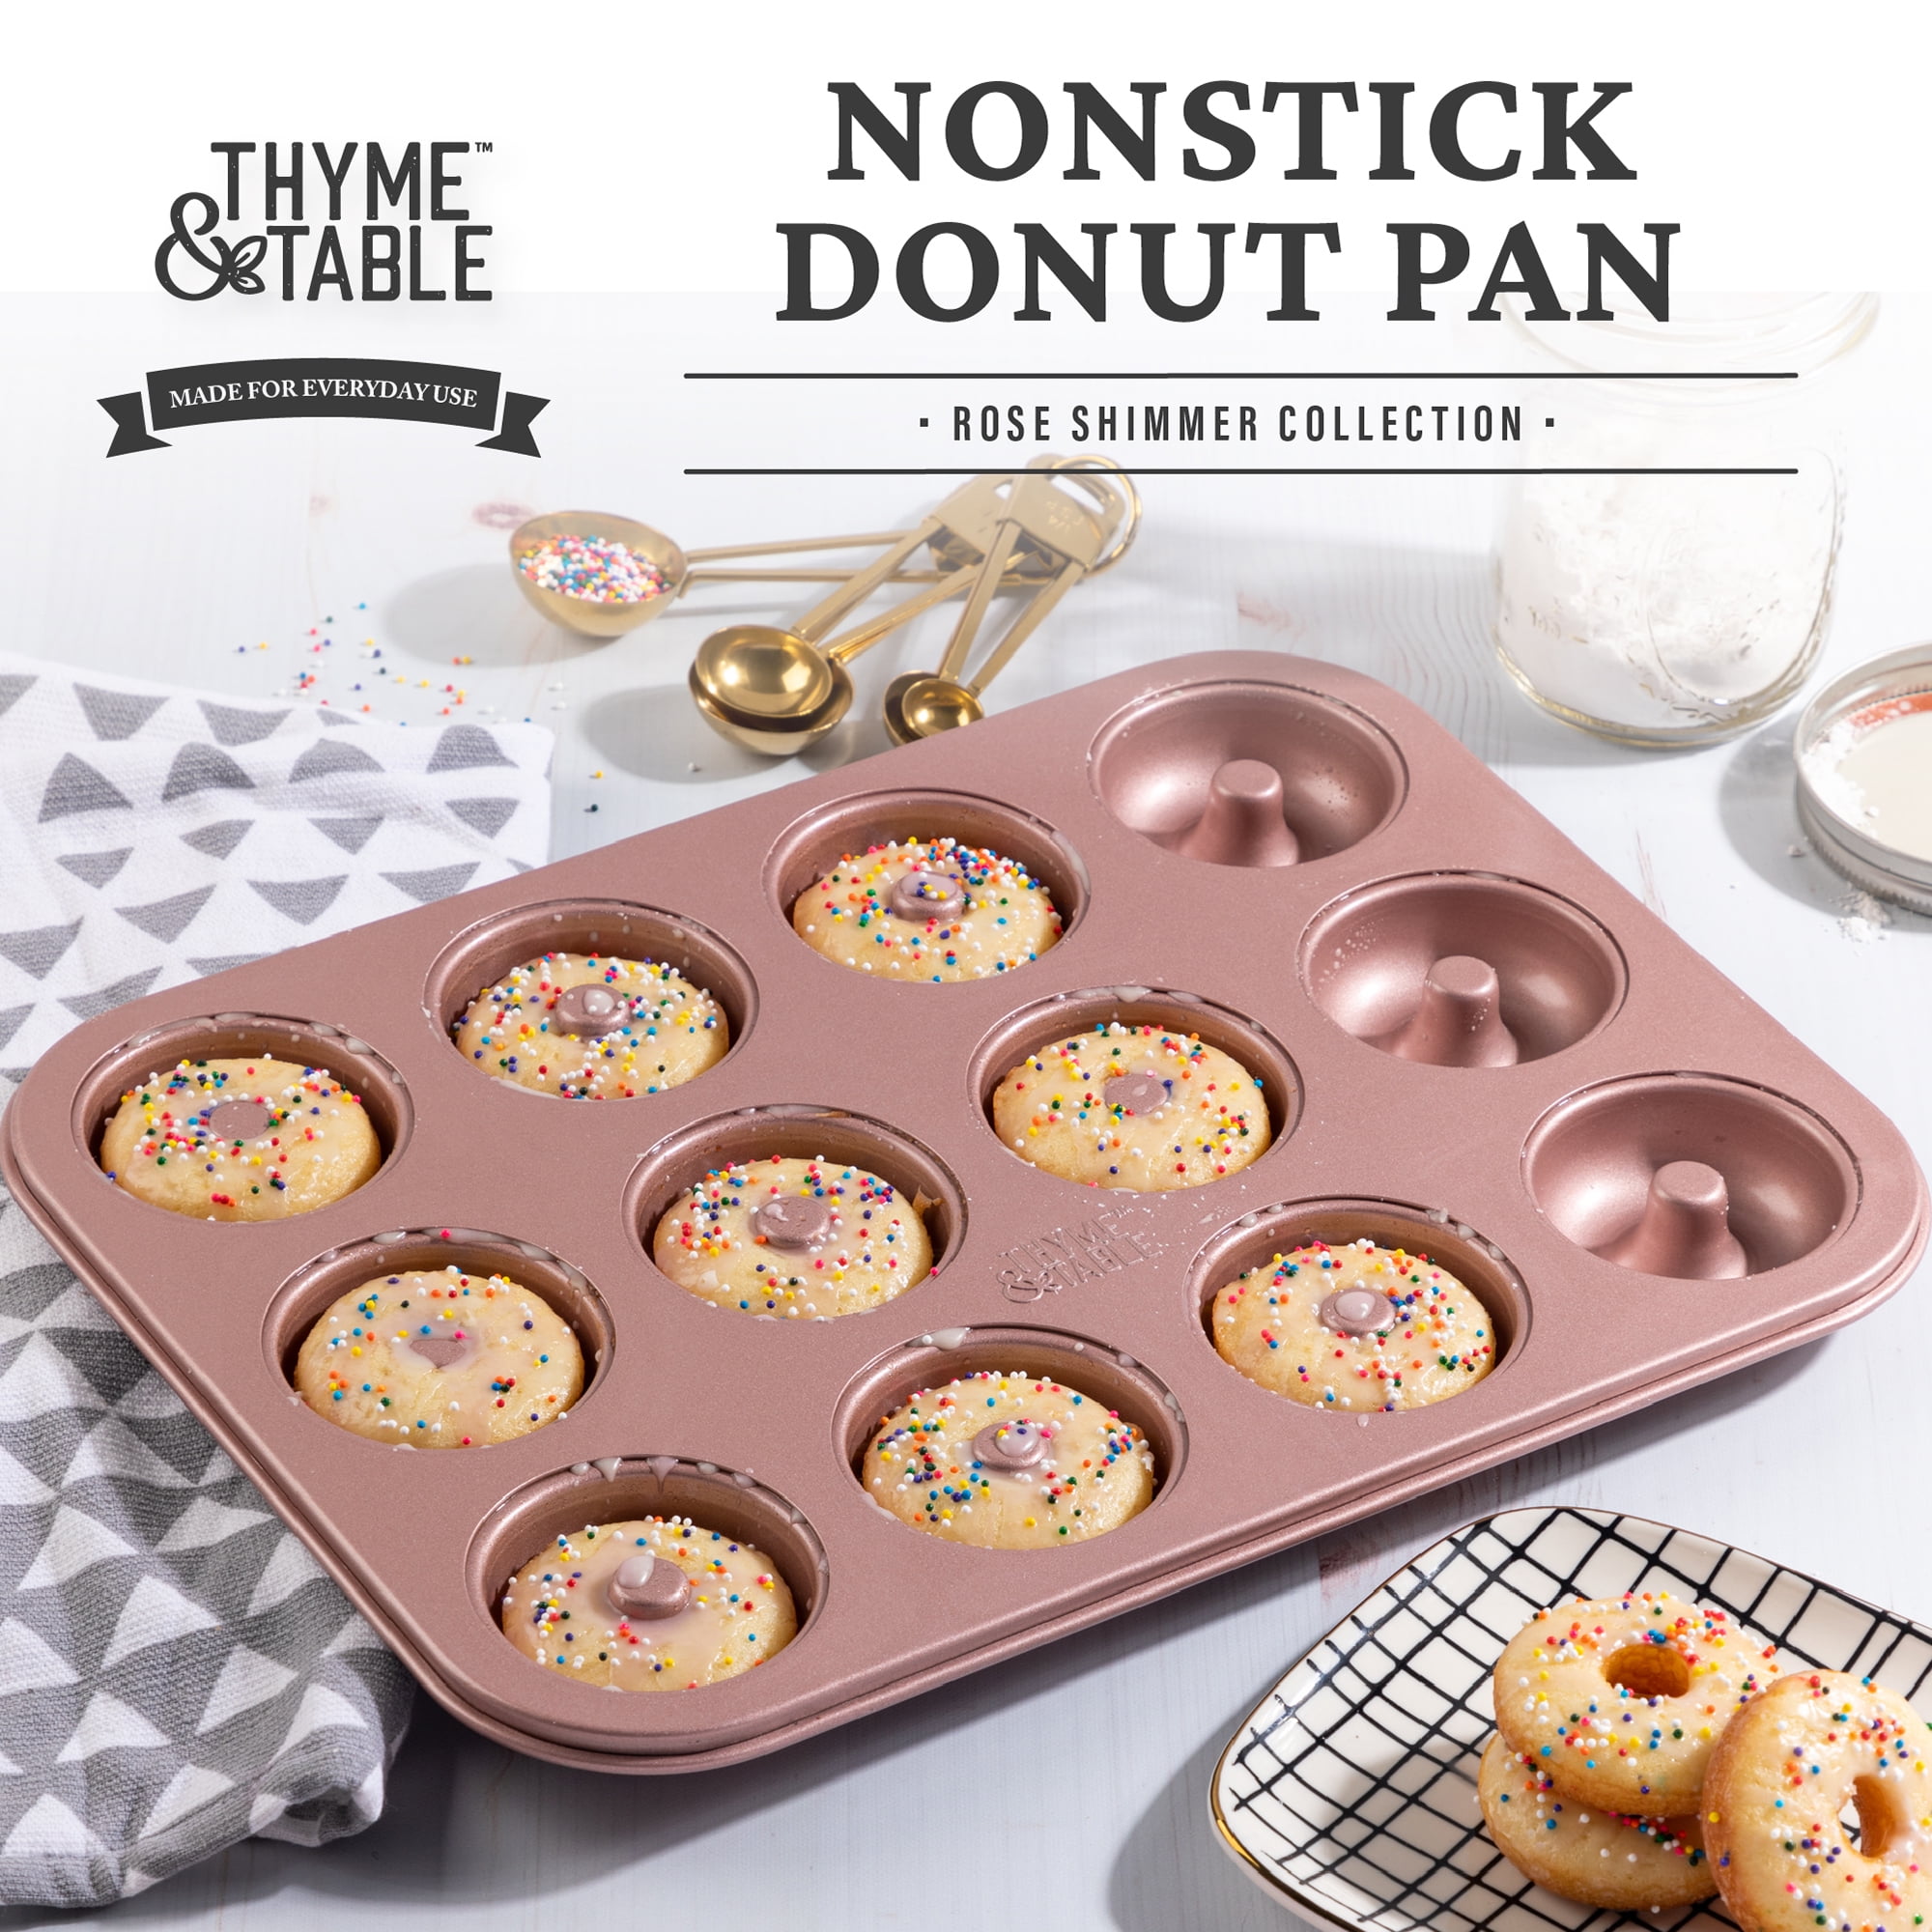 Thyme & Table 12 Cup Nonstick Muffin Pan with Silicone Baking Cups